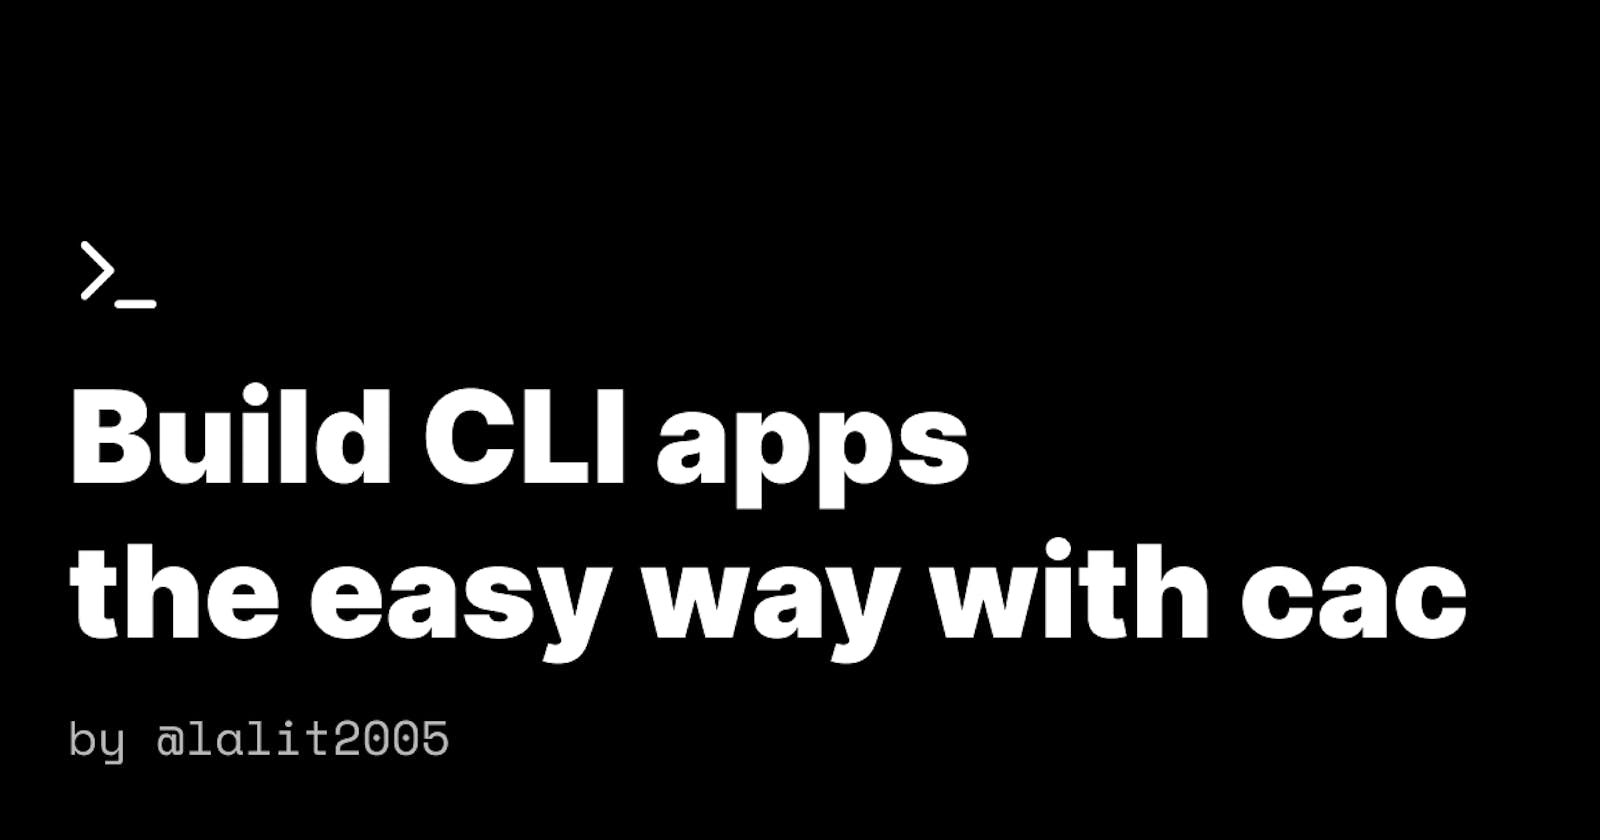 Create CLI apps the easy way with cac in less than 50 lines